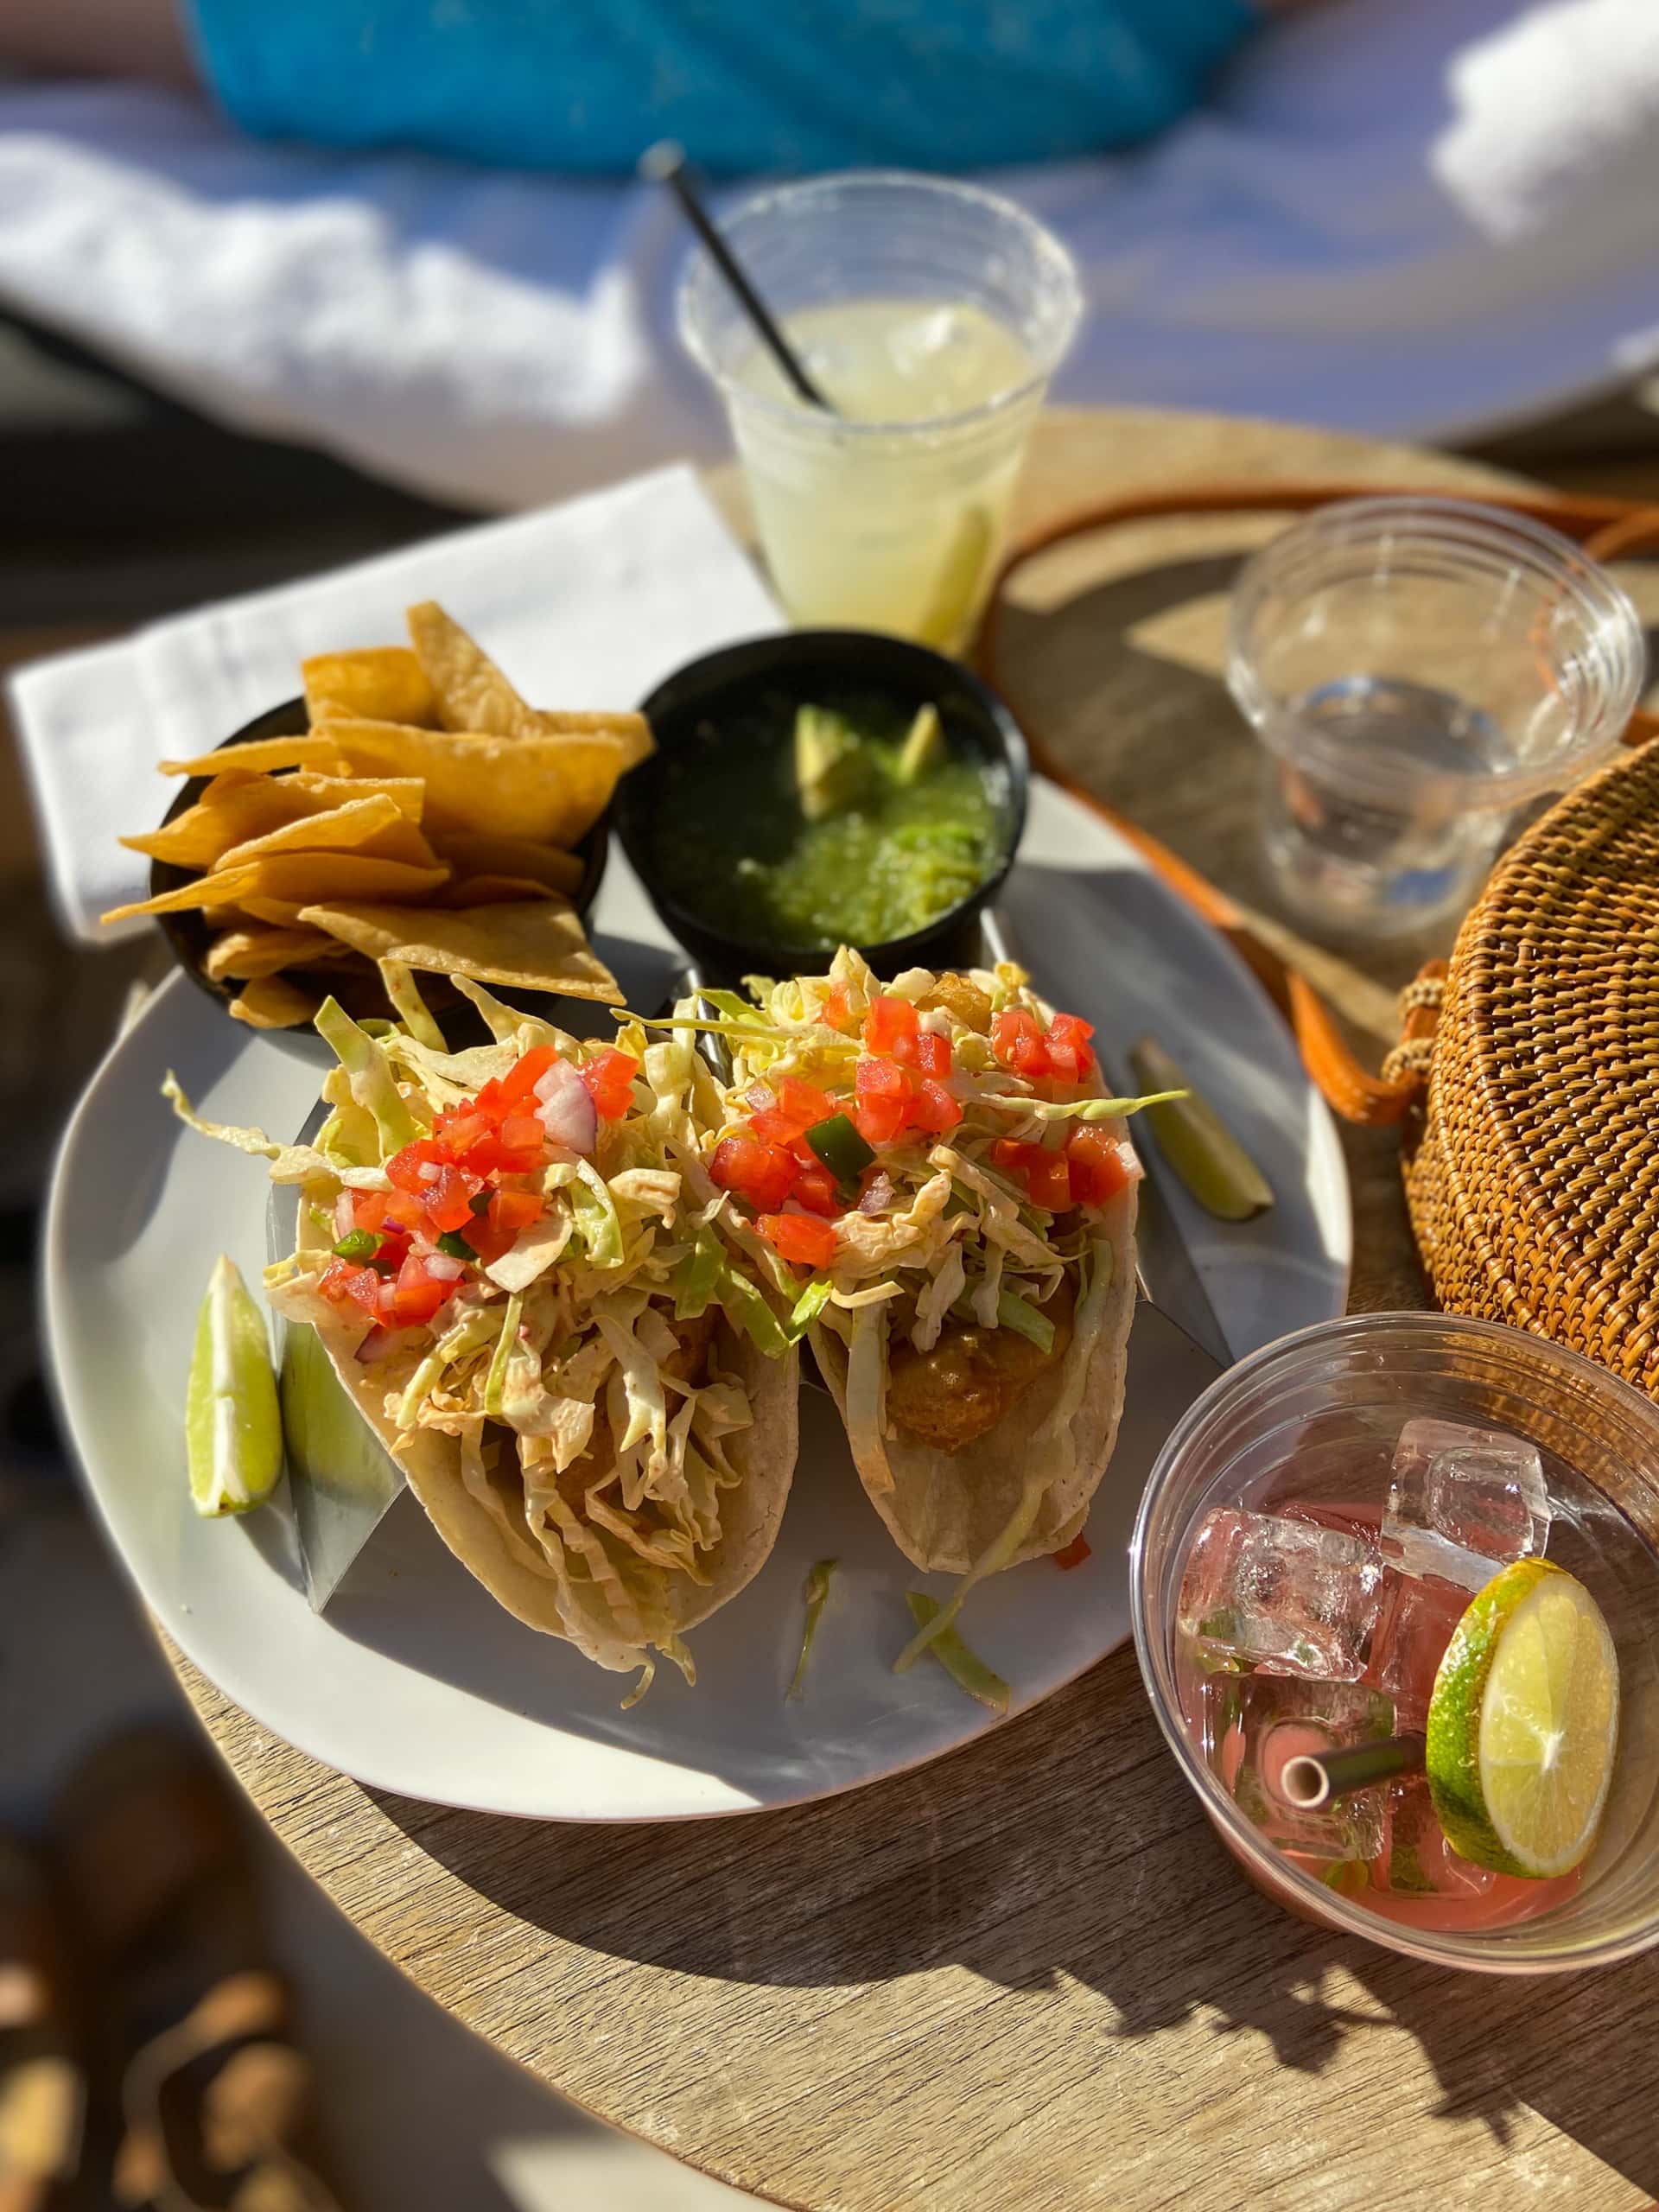 Fish tacos by the pool